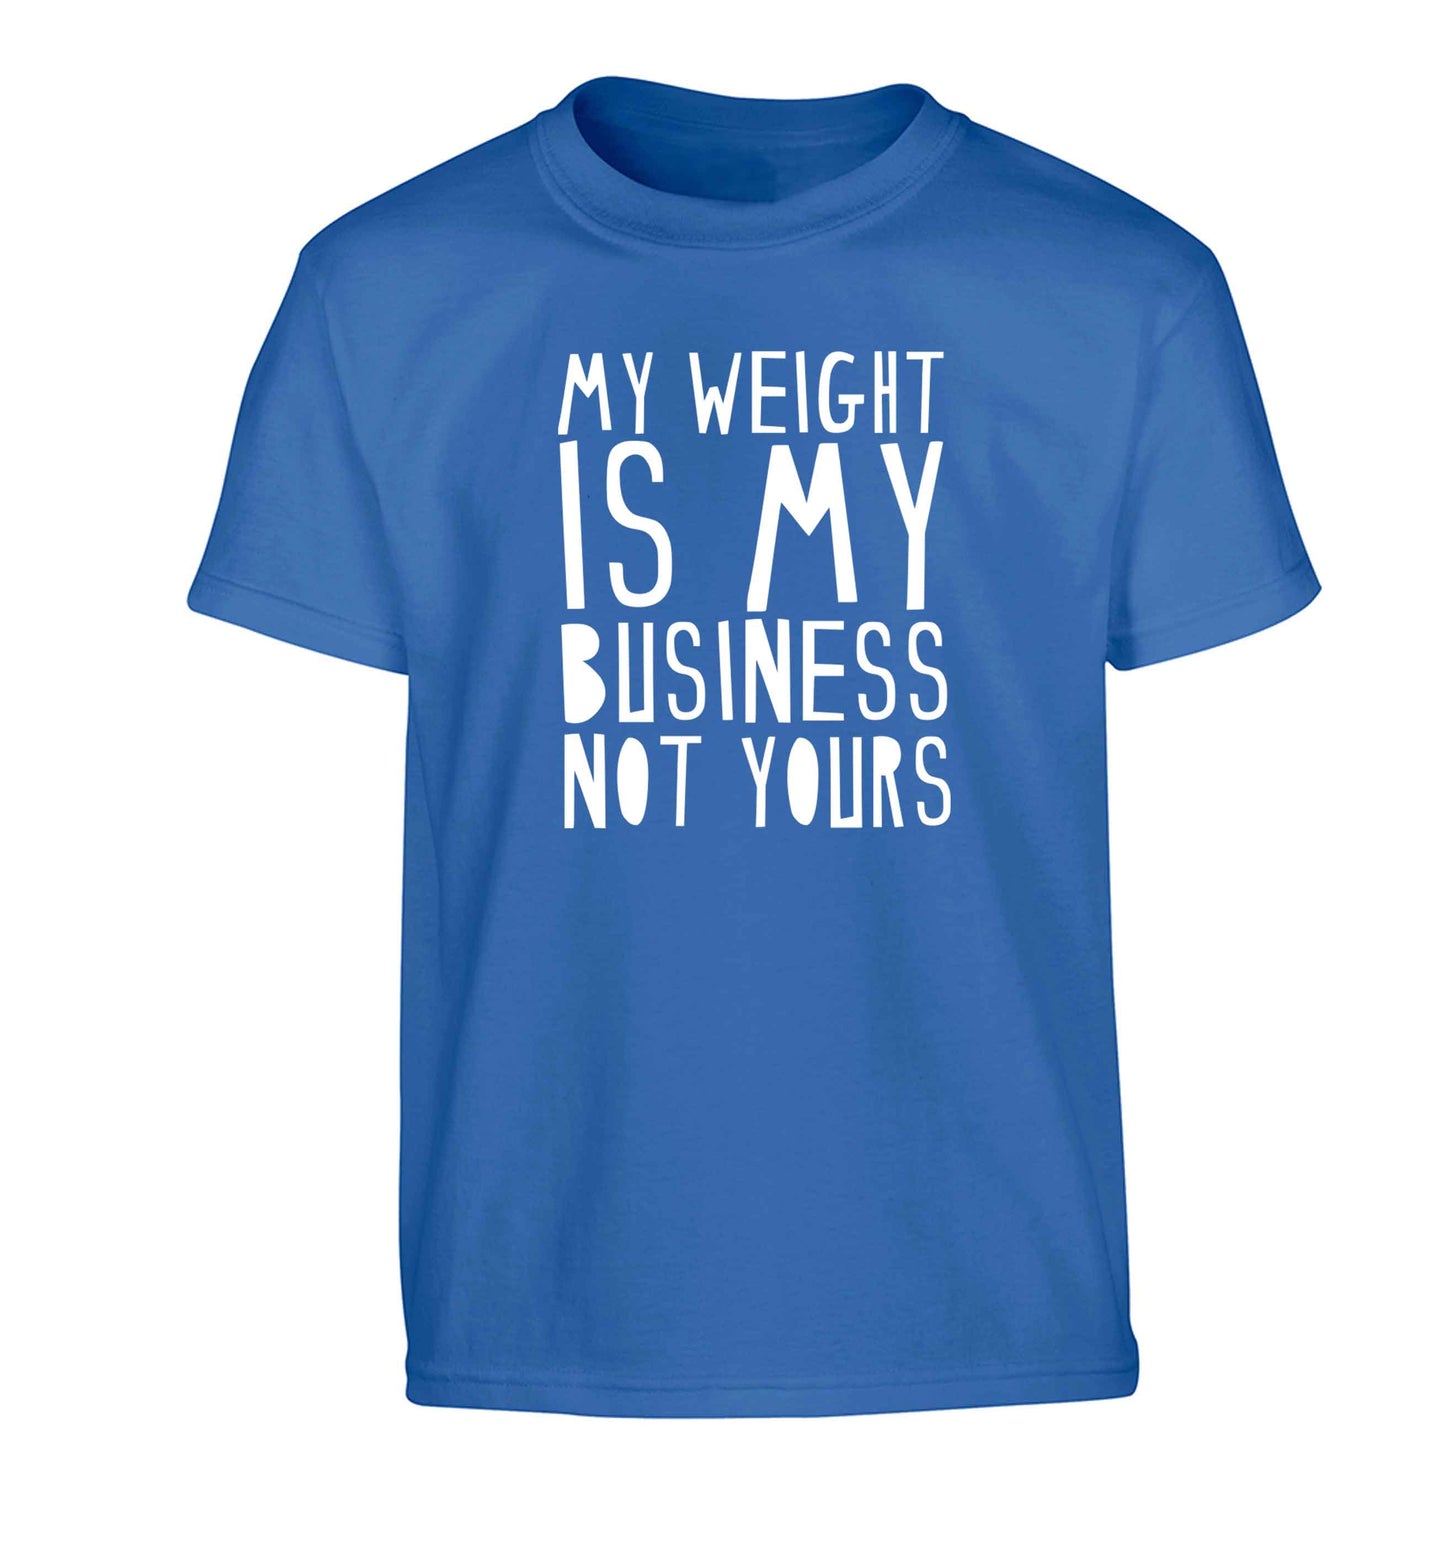 My weight is my business not yours Children's blue Tshirt 12-13 Years